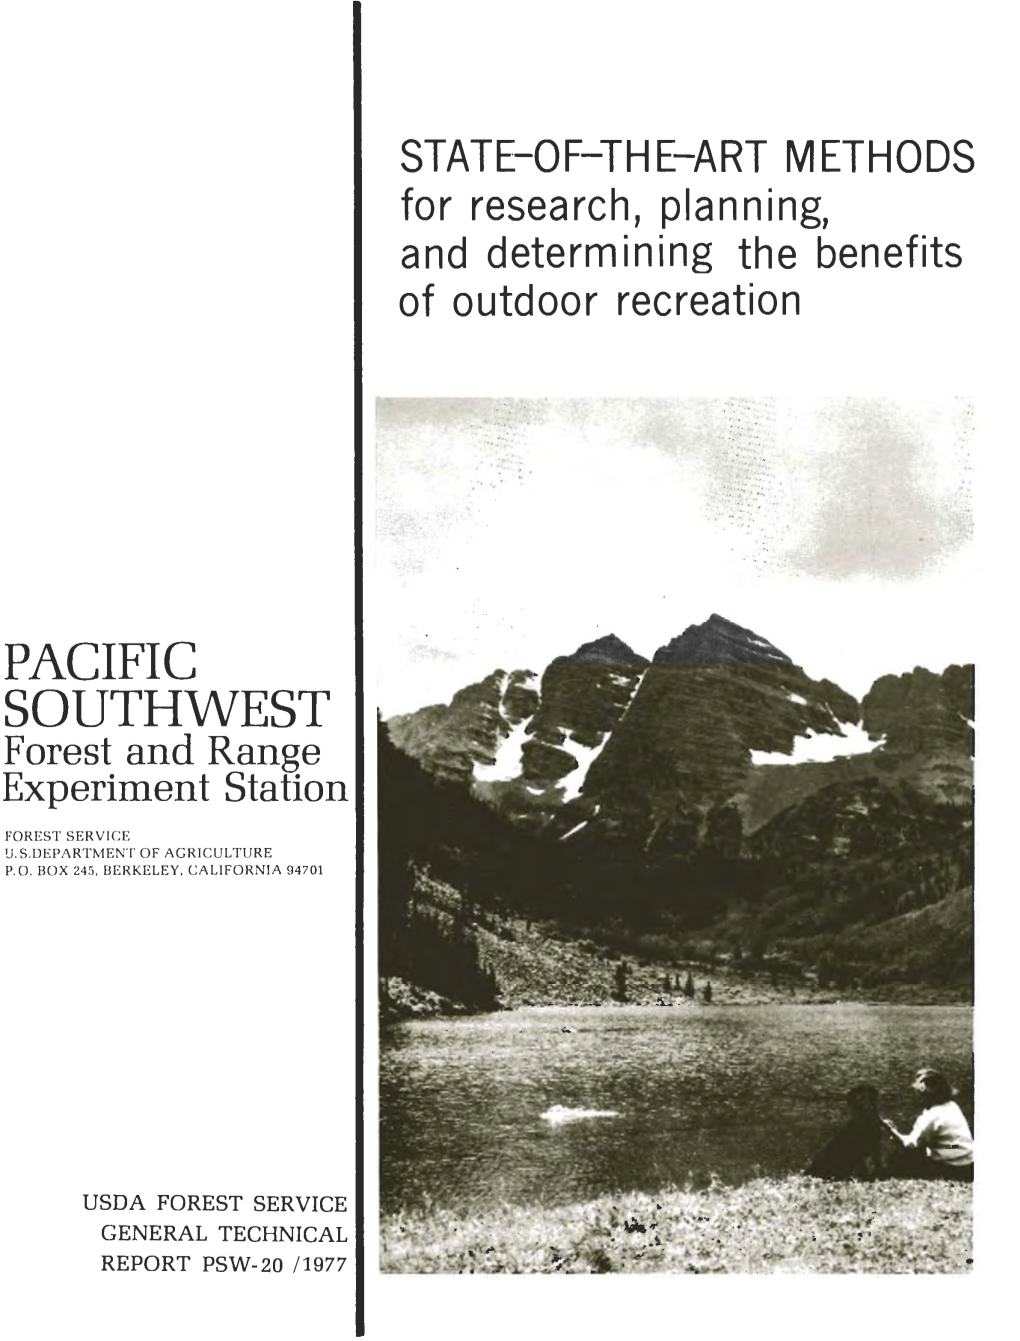 STATE-OF-THE-ART METHODS for Research, Planning, and Determining the Benefits of Outdoor Recreation